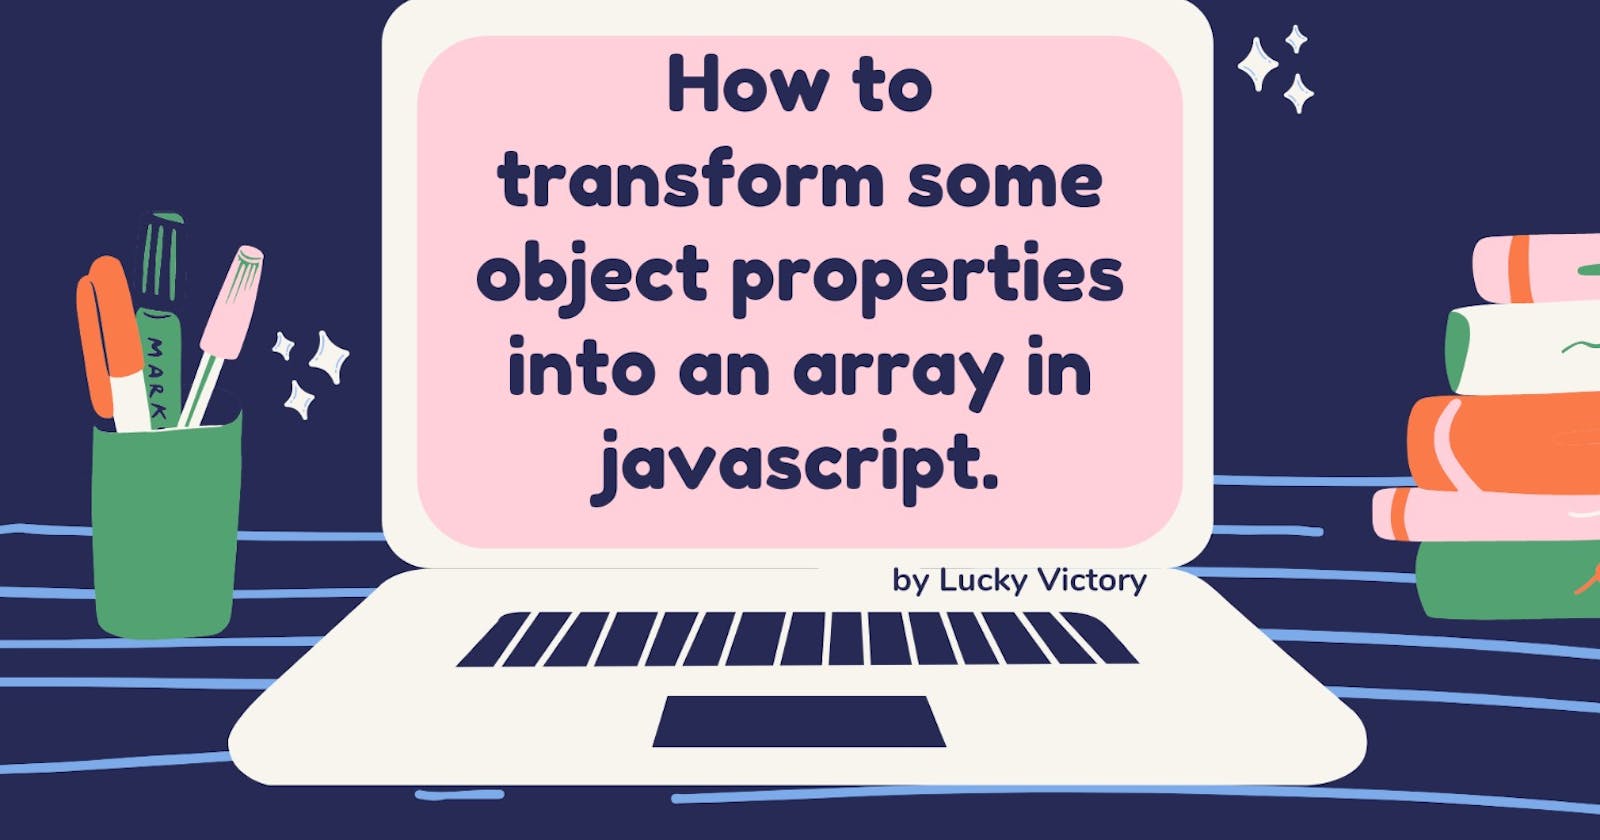 How to transform object properties into an array in Javascript.